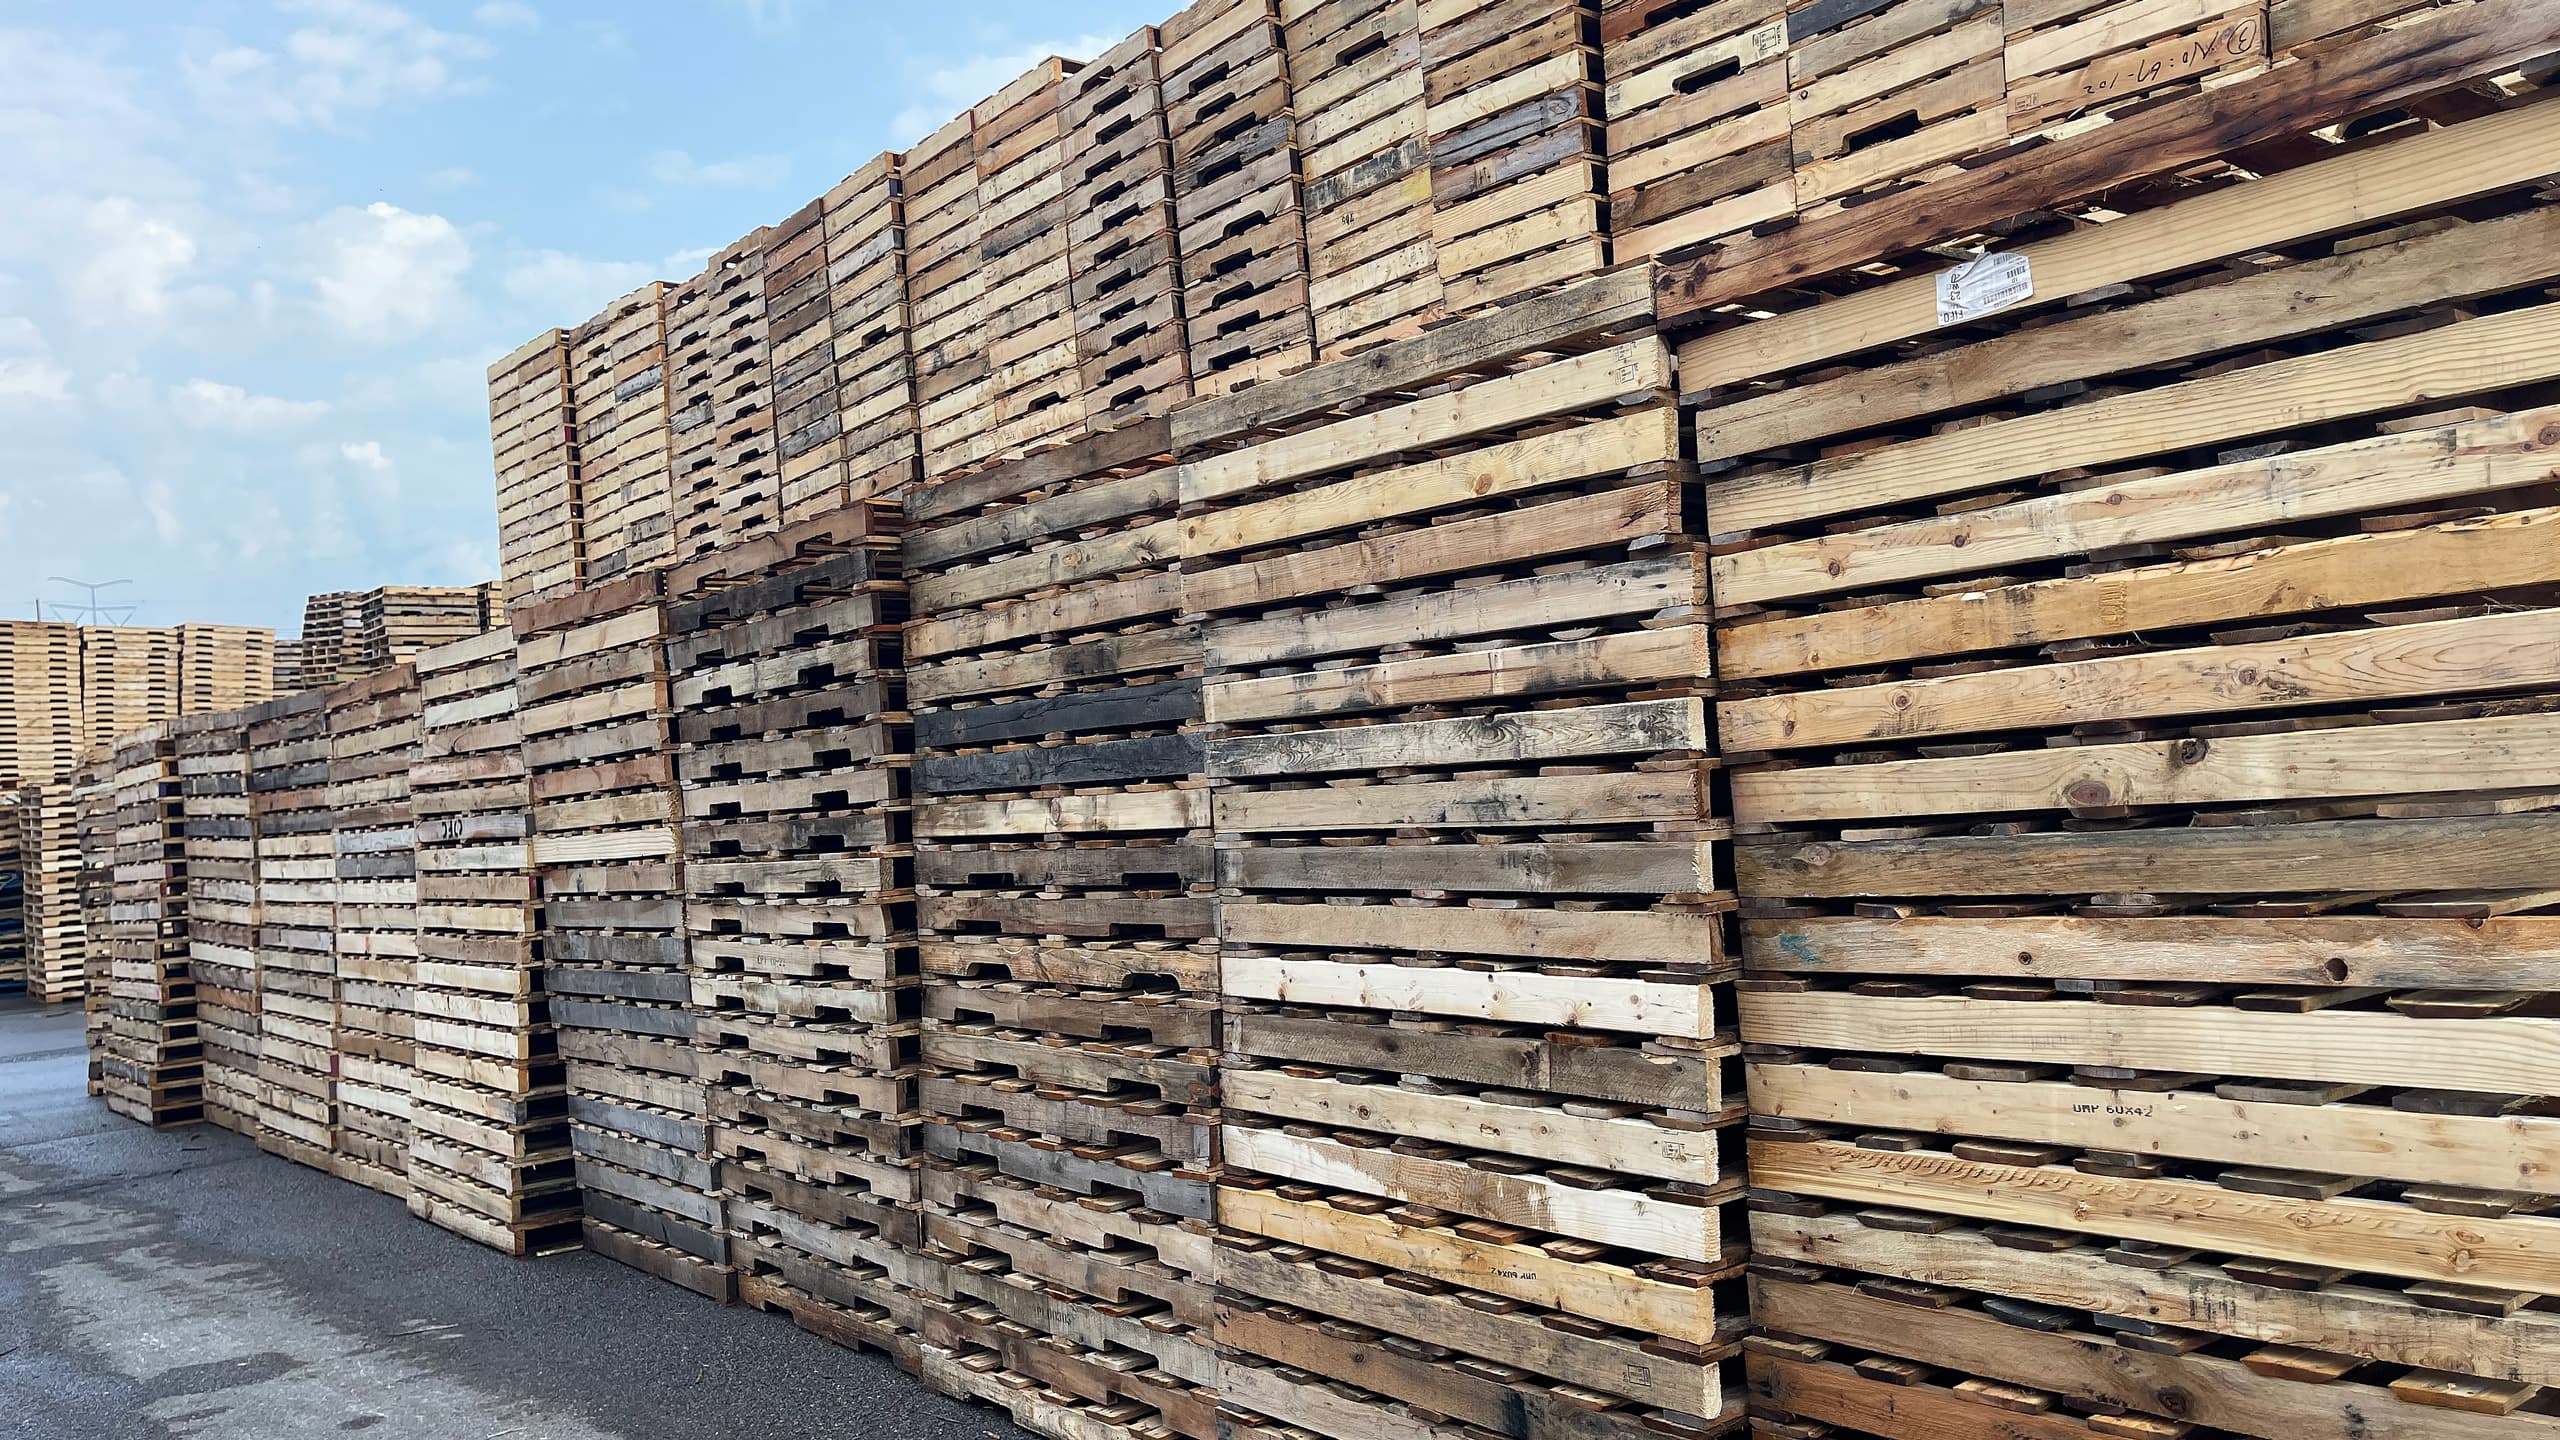 Remanufactured pallets arranged in stacks outdoors on a sunny day